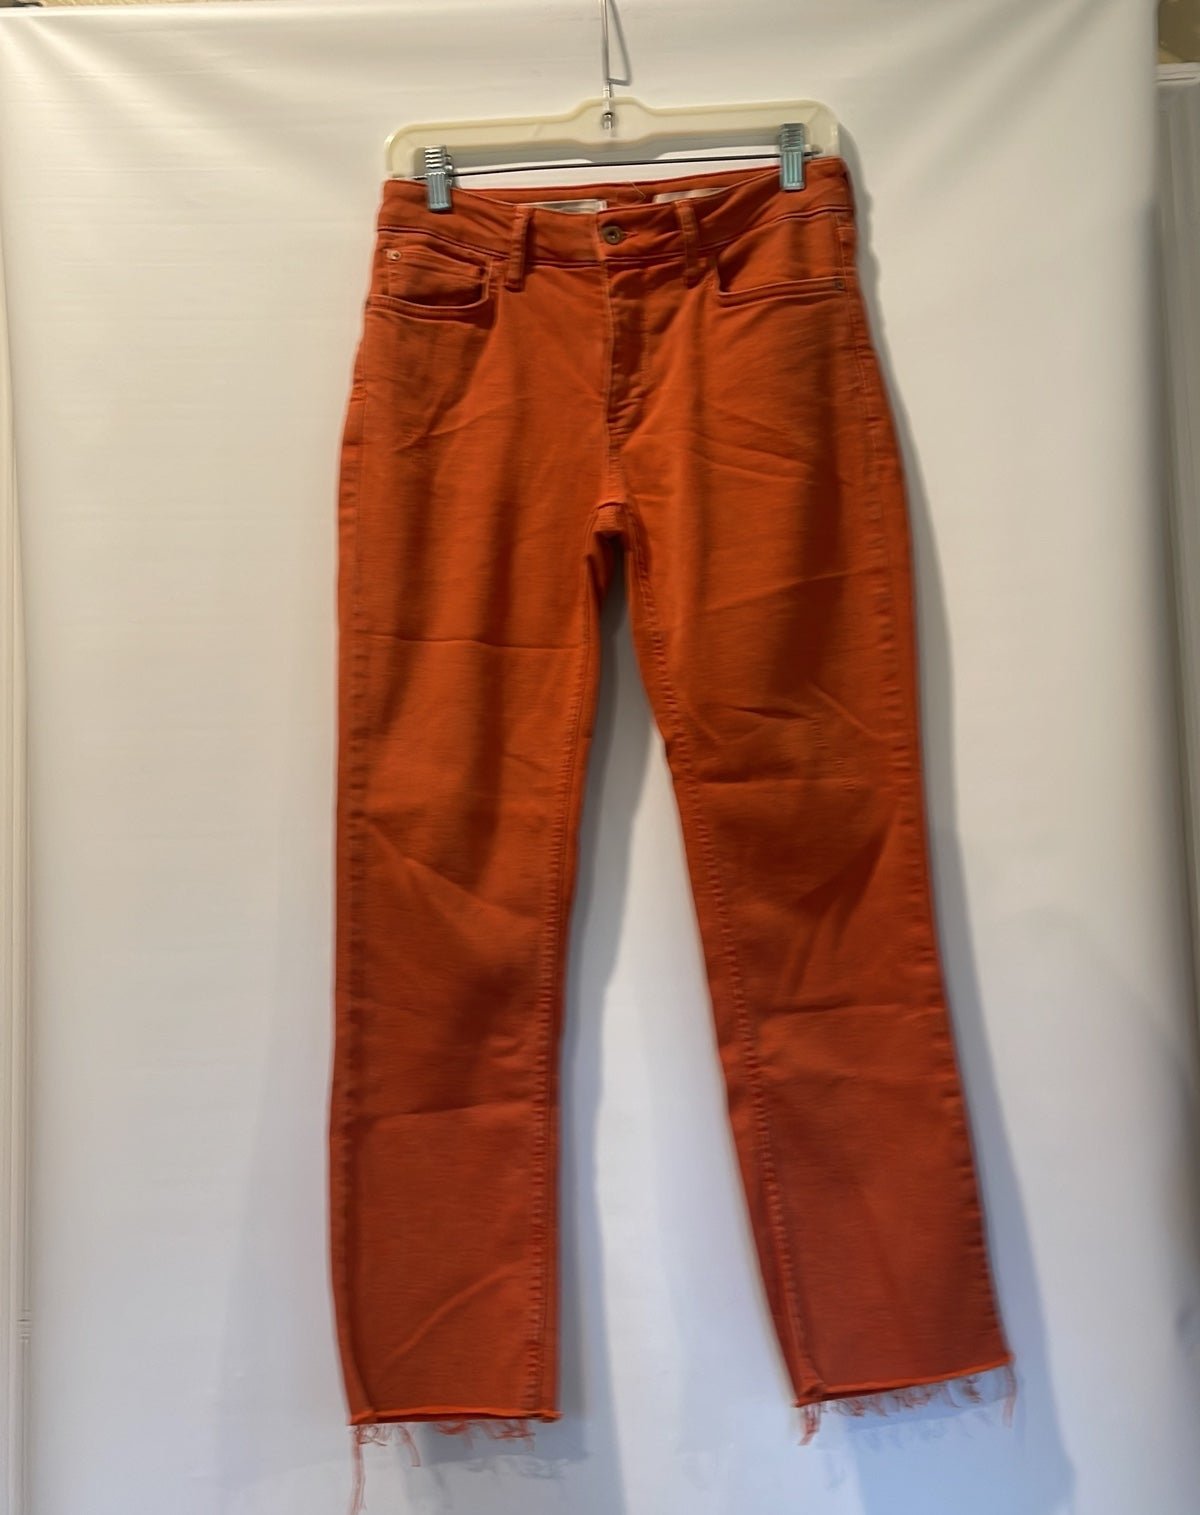 Nice Anthropologie Pilcro high rise boot cut Jeans PNoc